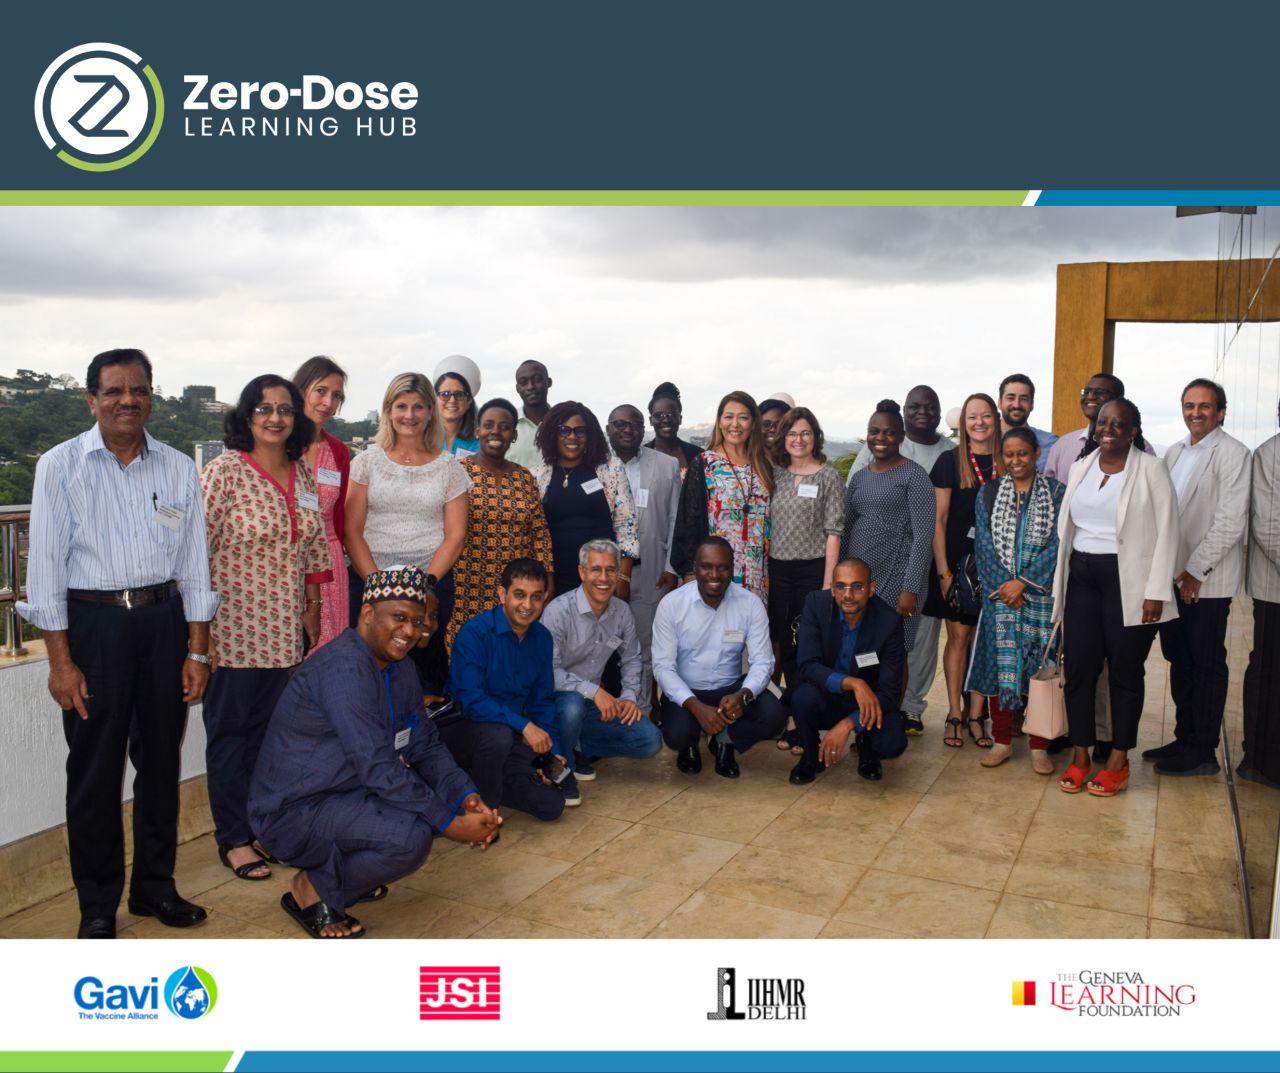 Uniting for Immunisation: Insights from the first Zero-Dose Learning Hub meeting